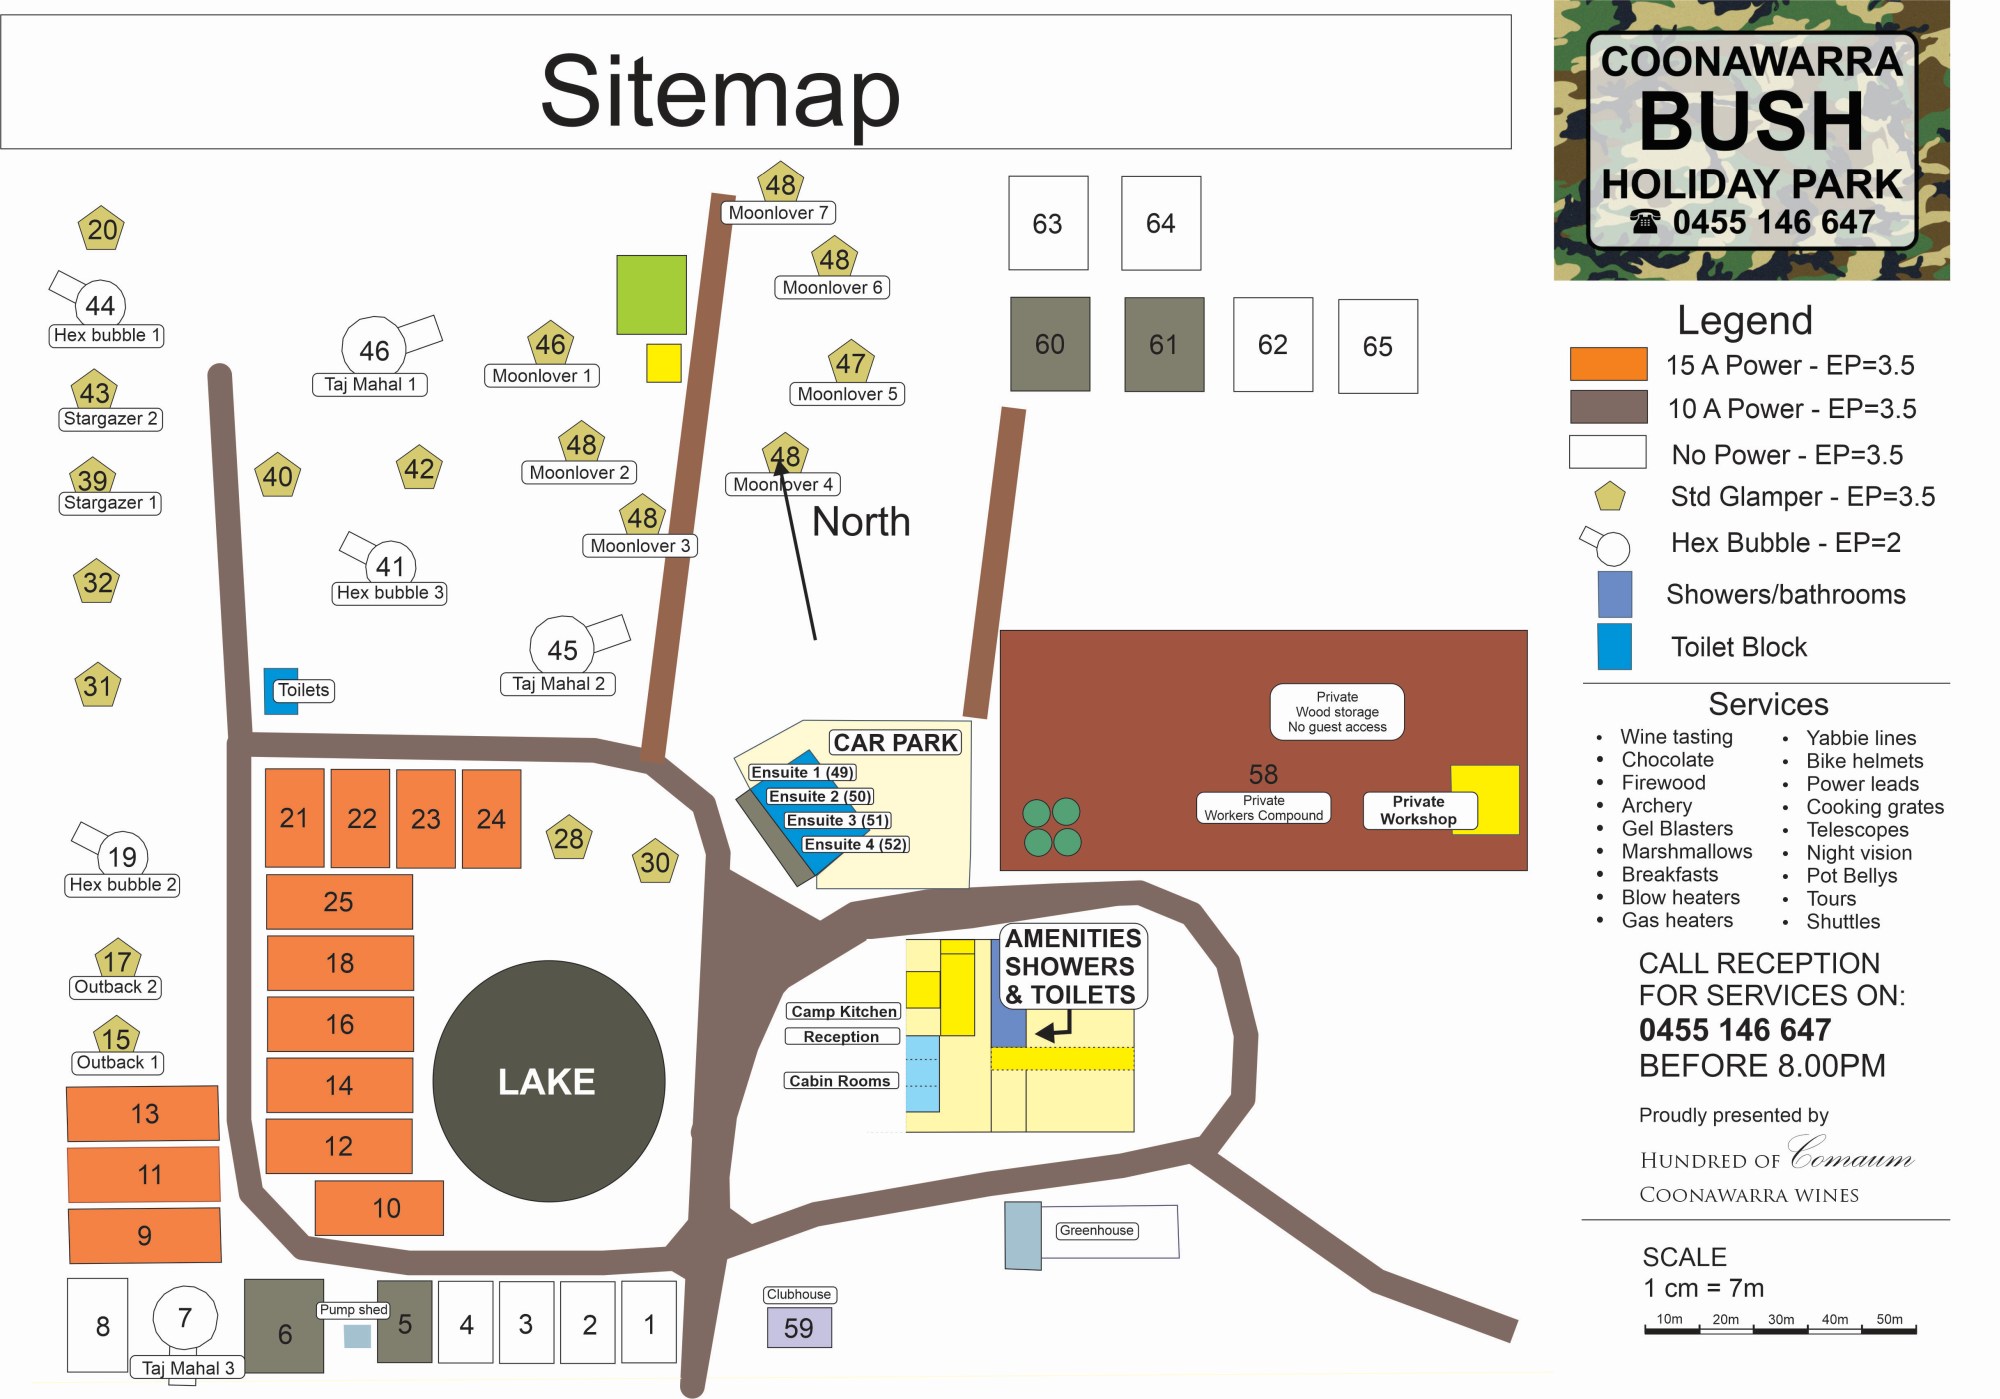 A site map of the whole park